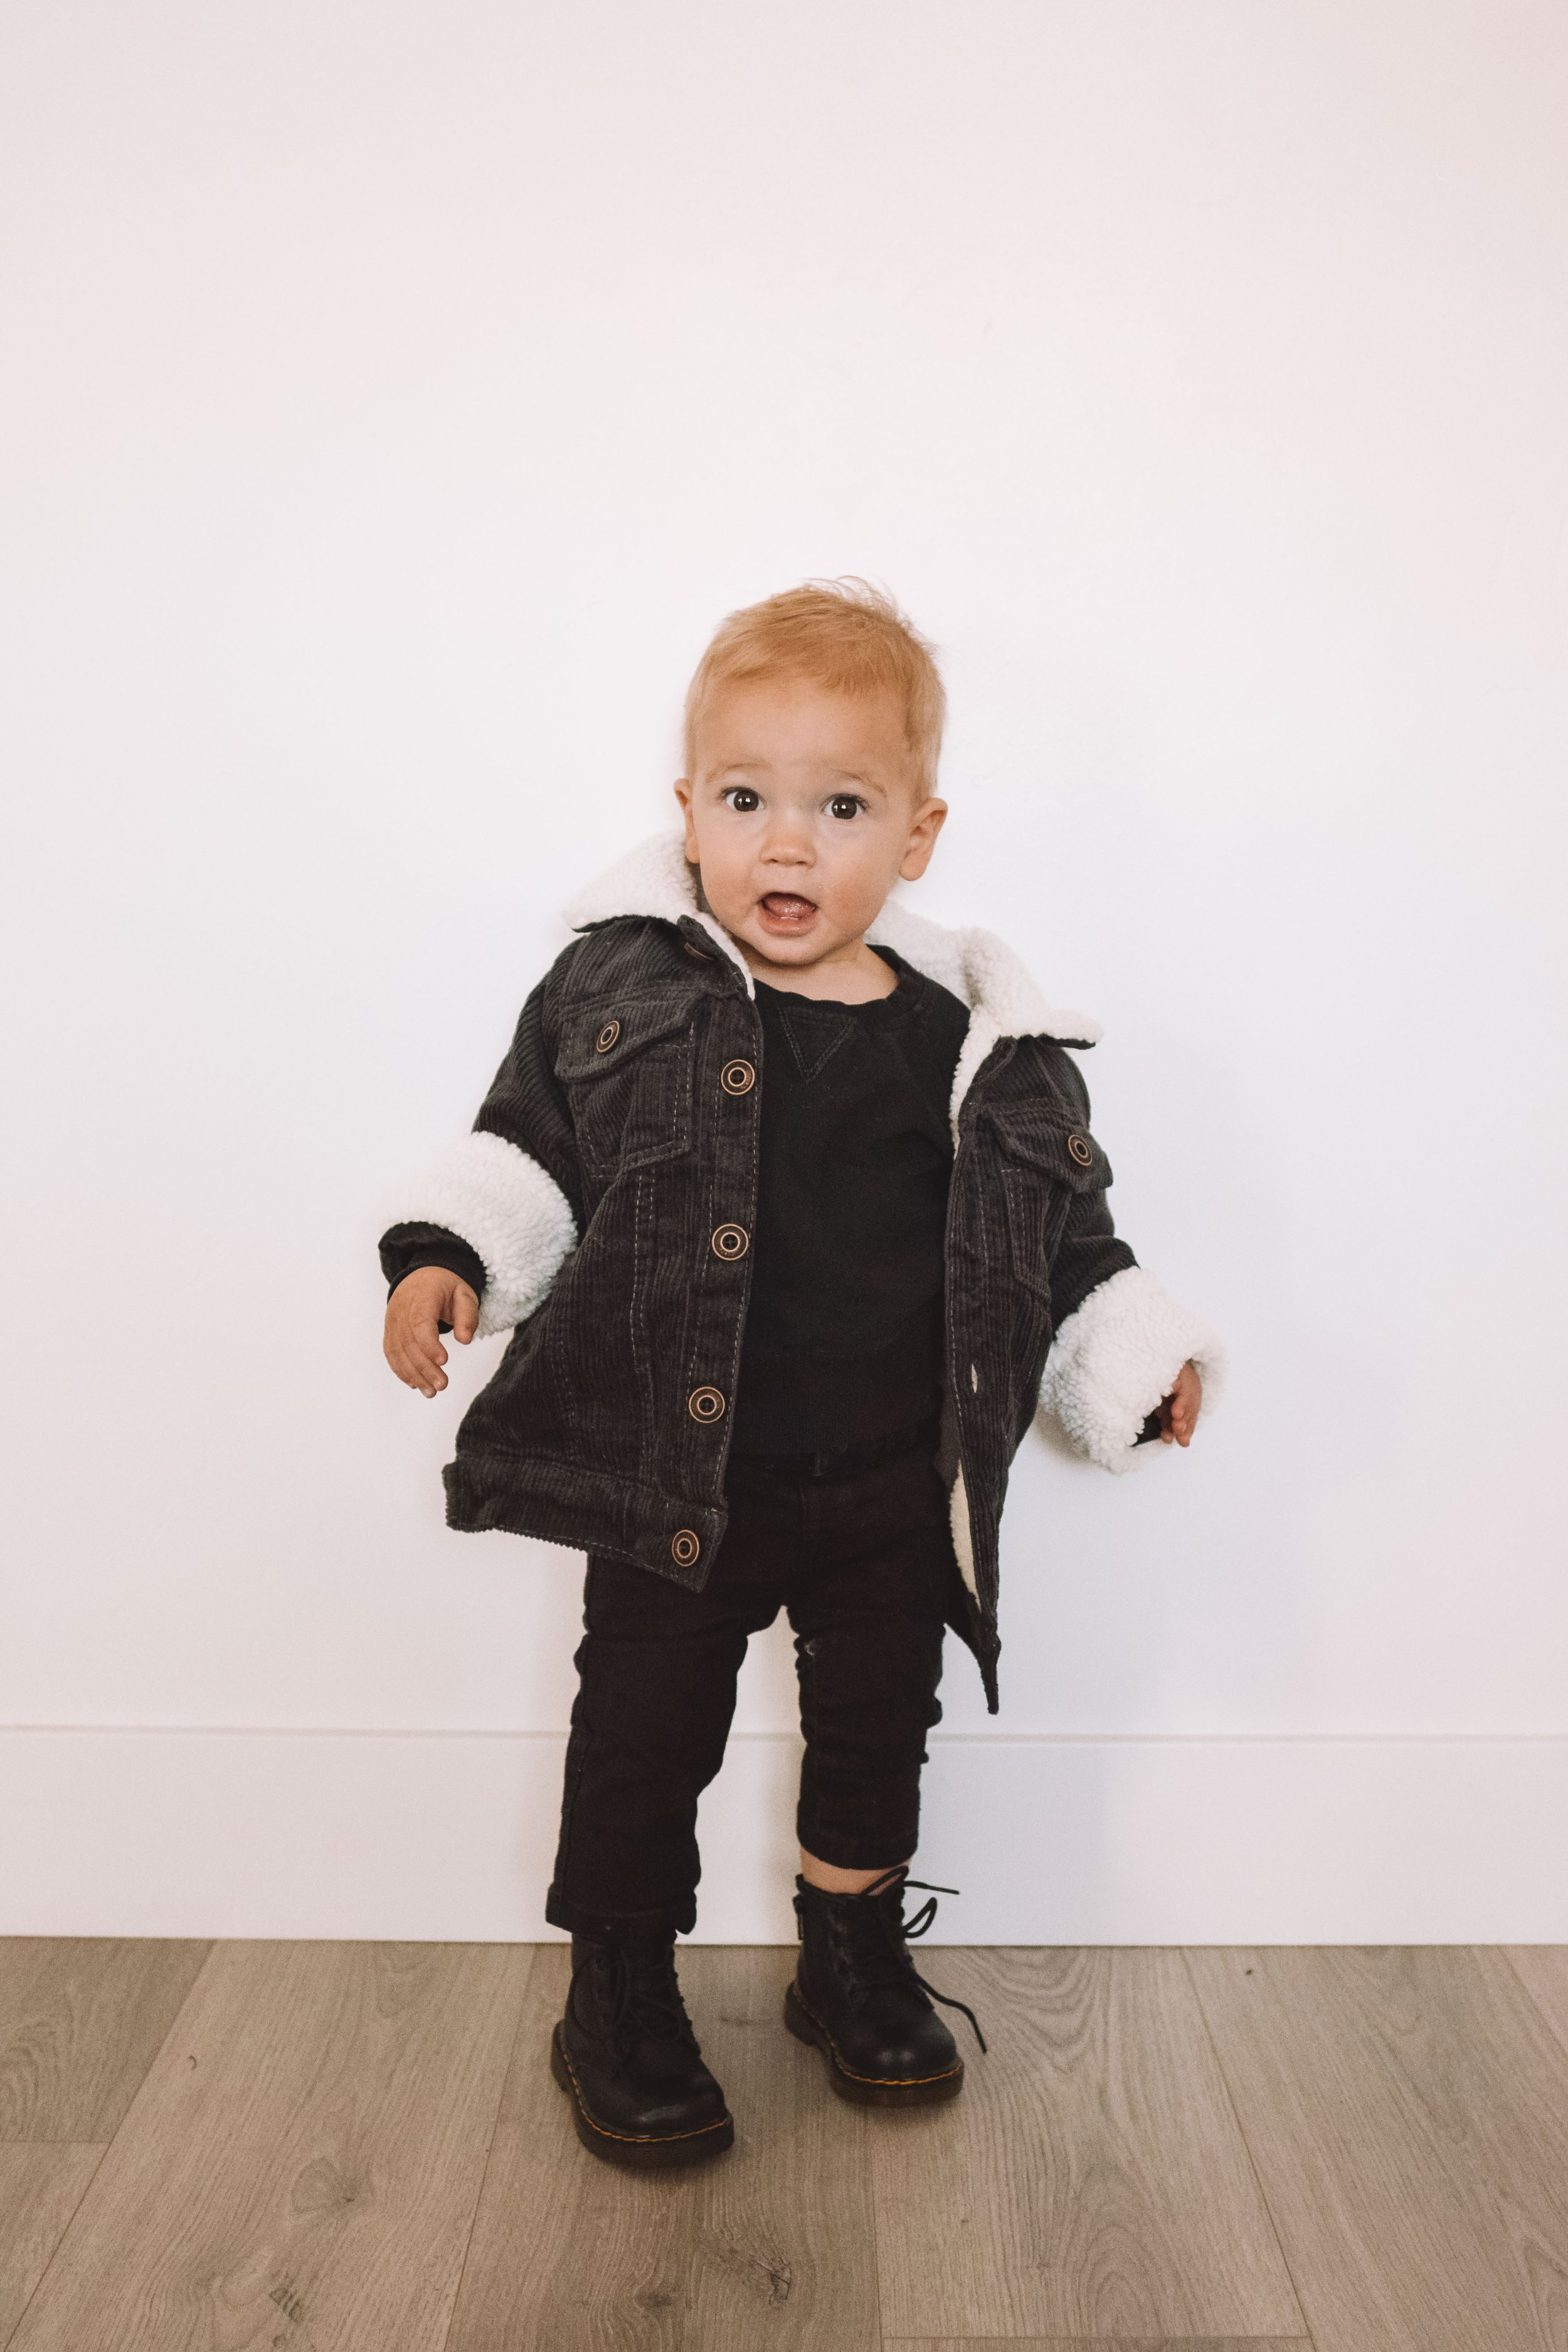 Baby Corduroy Jacket from Amazon - Mommy and Me Winter Outfits